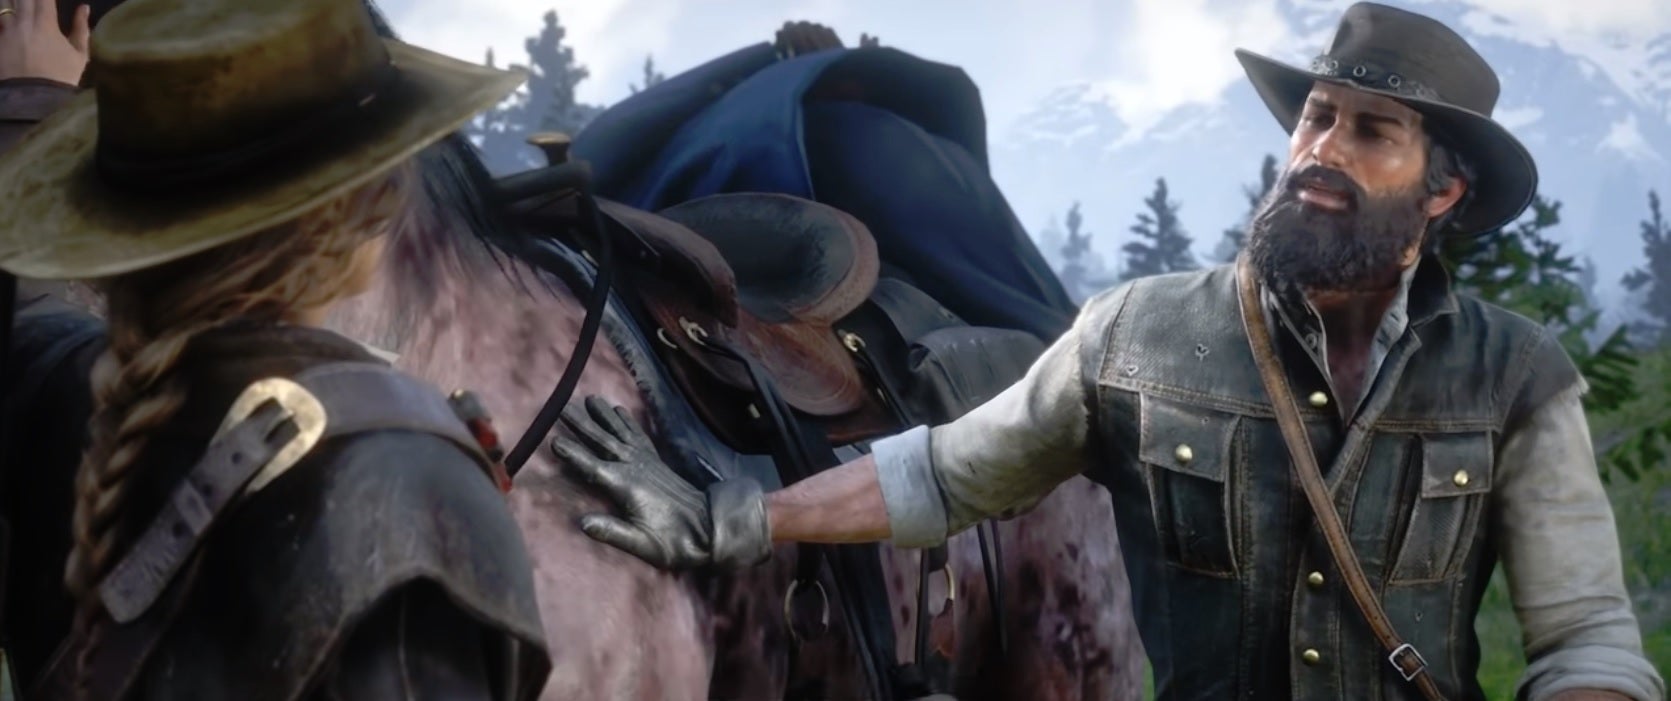 Red Dead Redemption Spoilers FAQ: Endings, Deaths and More | VG247